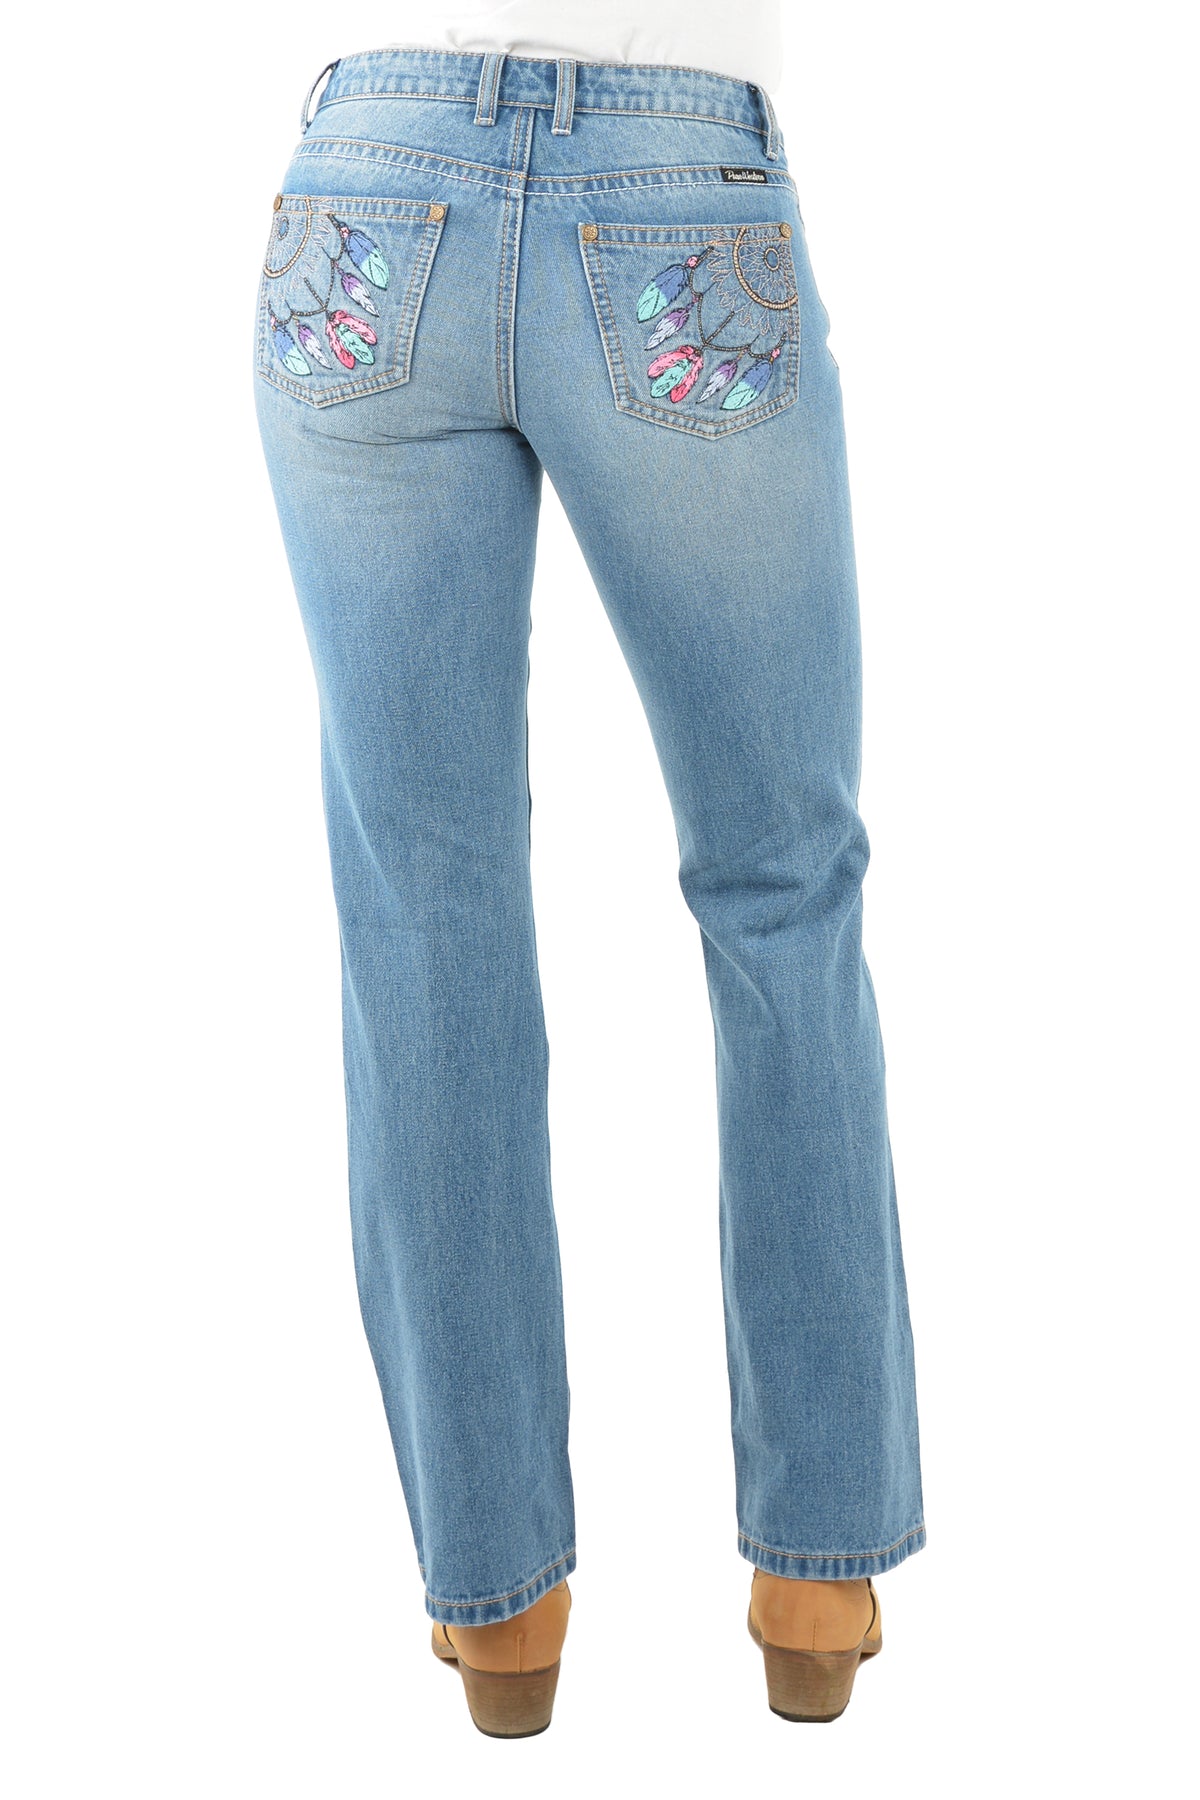 Pure Western Womens Sunny Boot Cut Jean - Faded Blue